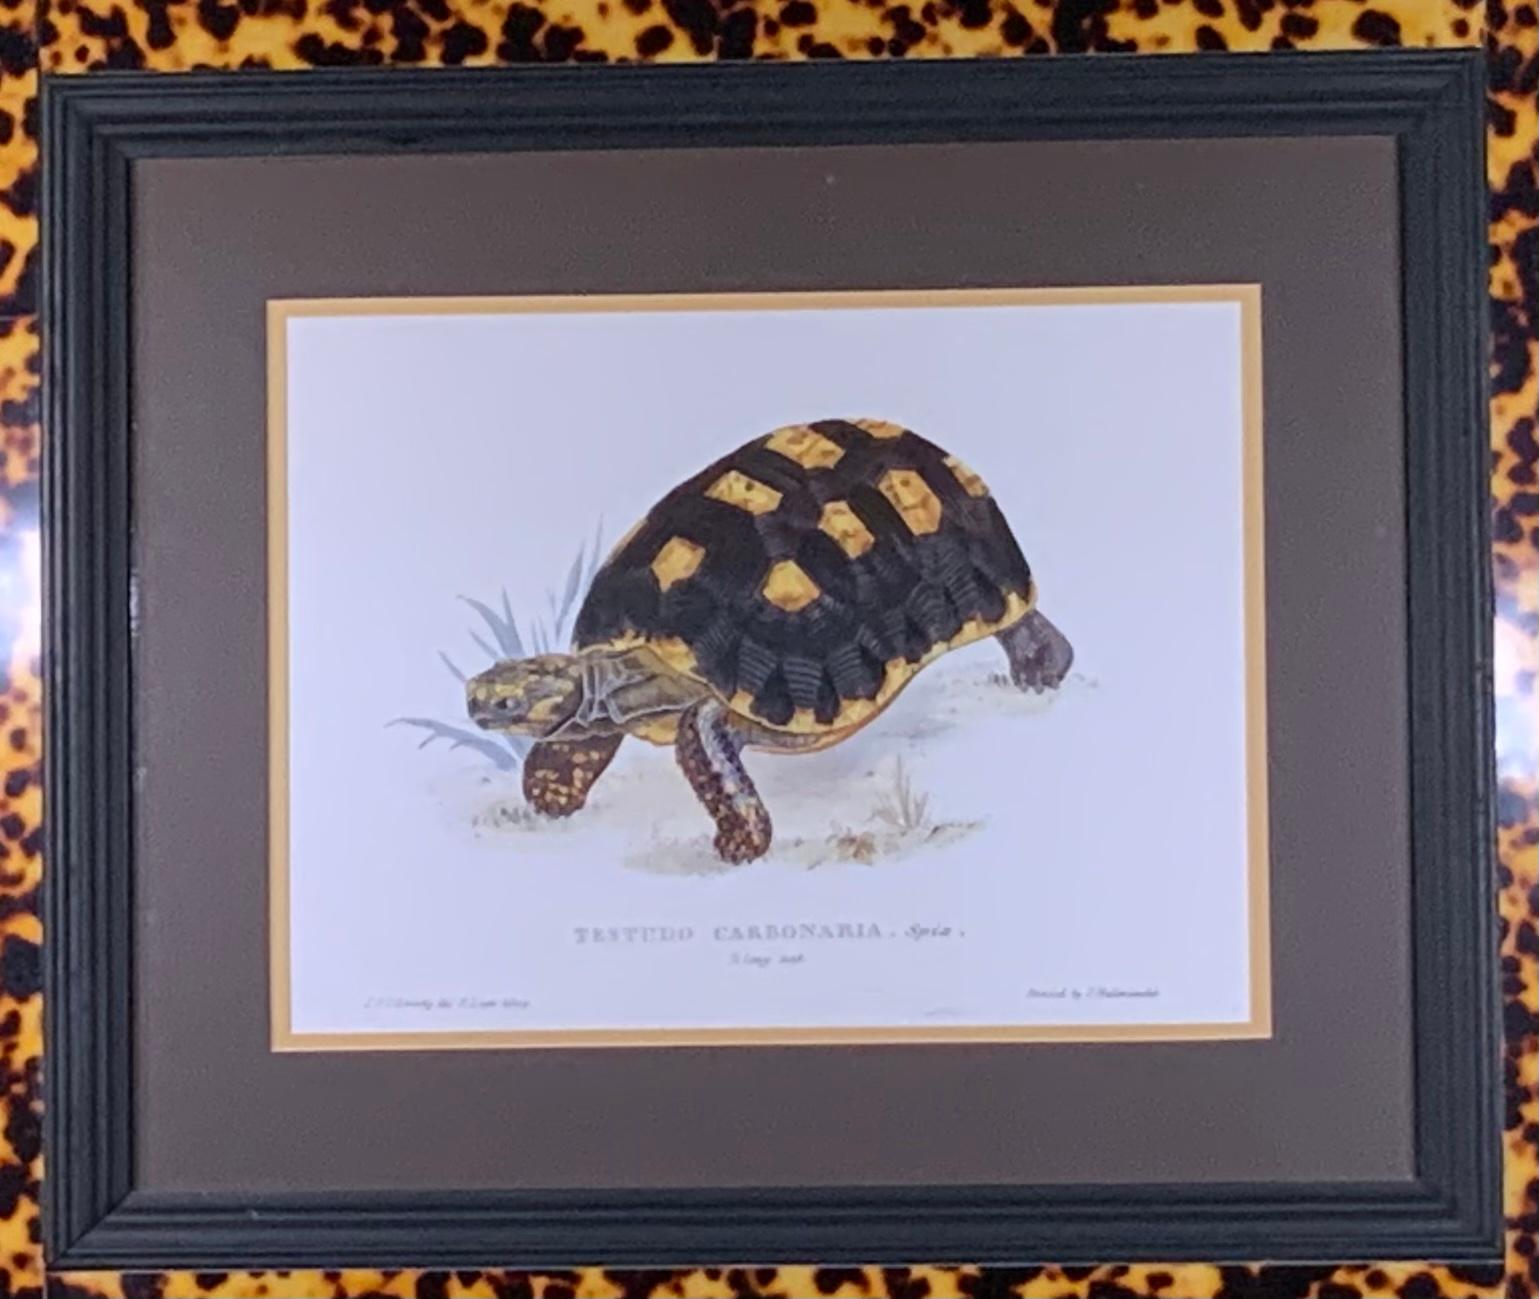 Beautiful turtle print framed with decorative double wood frame and turtle shell Lucite faux border. Commissioned by designer John Richard.
Print size only: 15” x 11”.